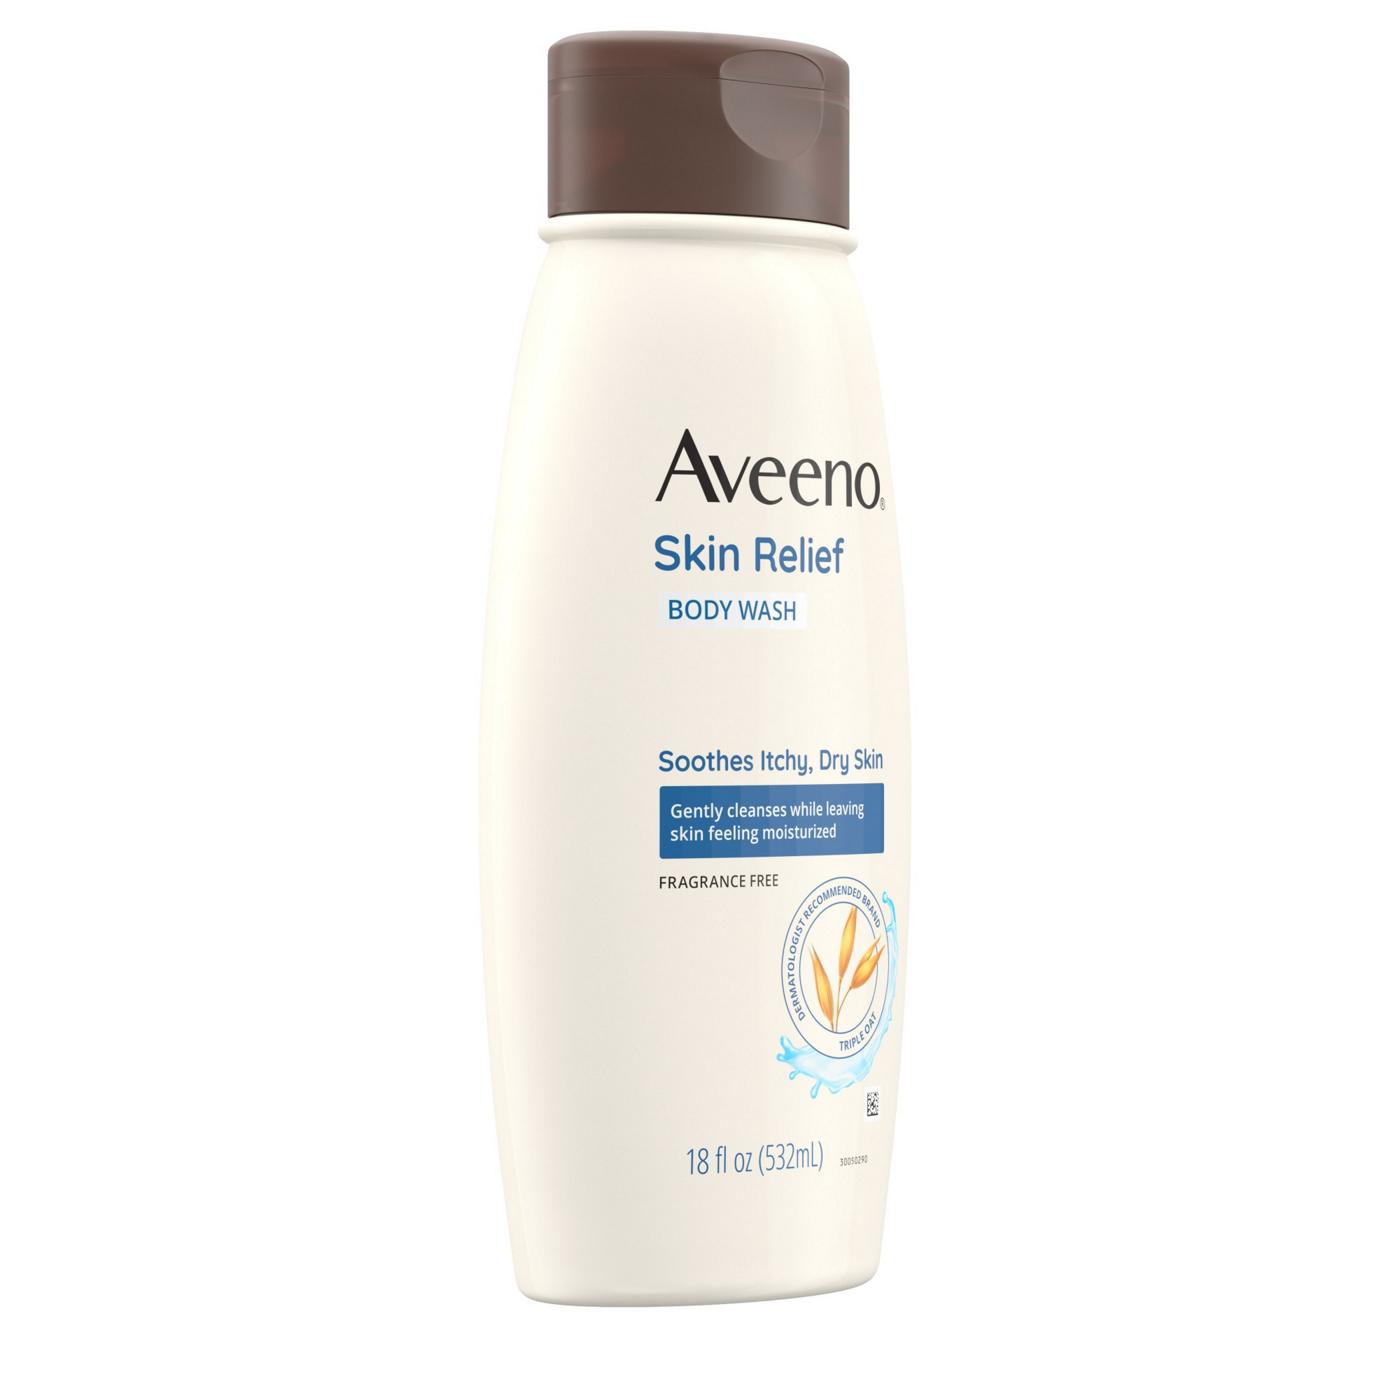 Aveeno Skin Relief Body Wash - Fragrance Free; image 6 of 6